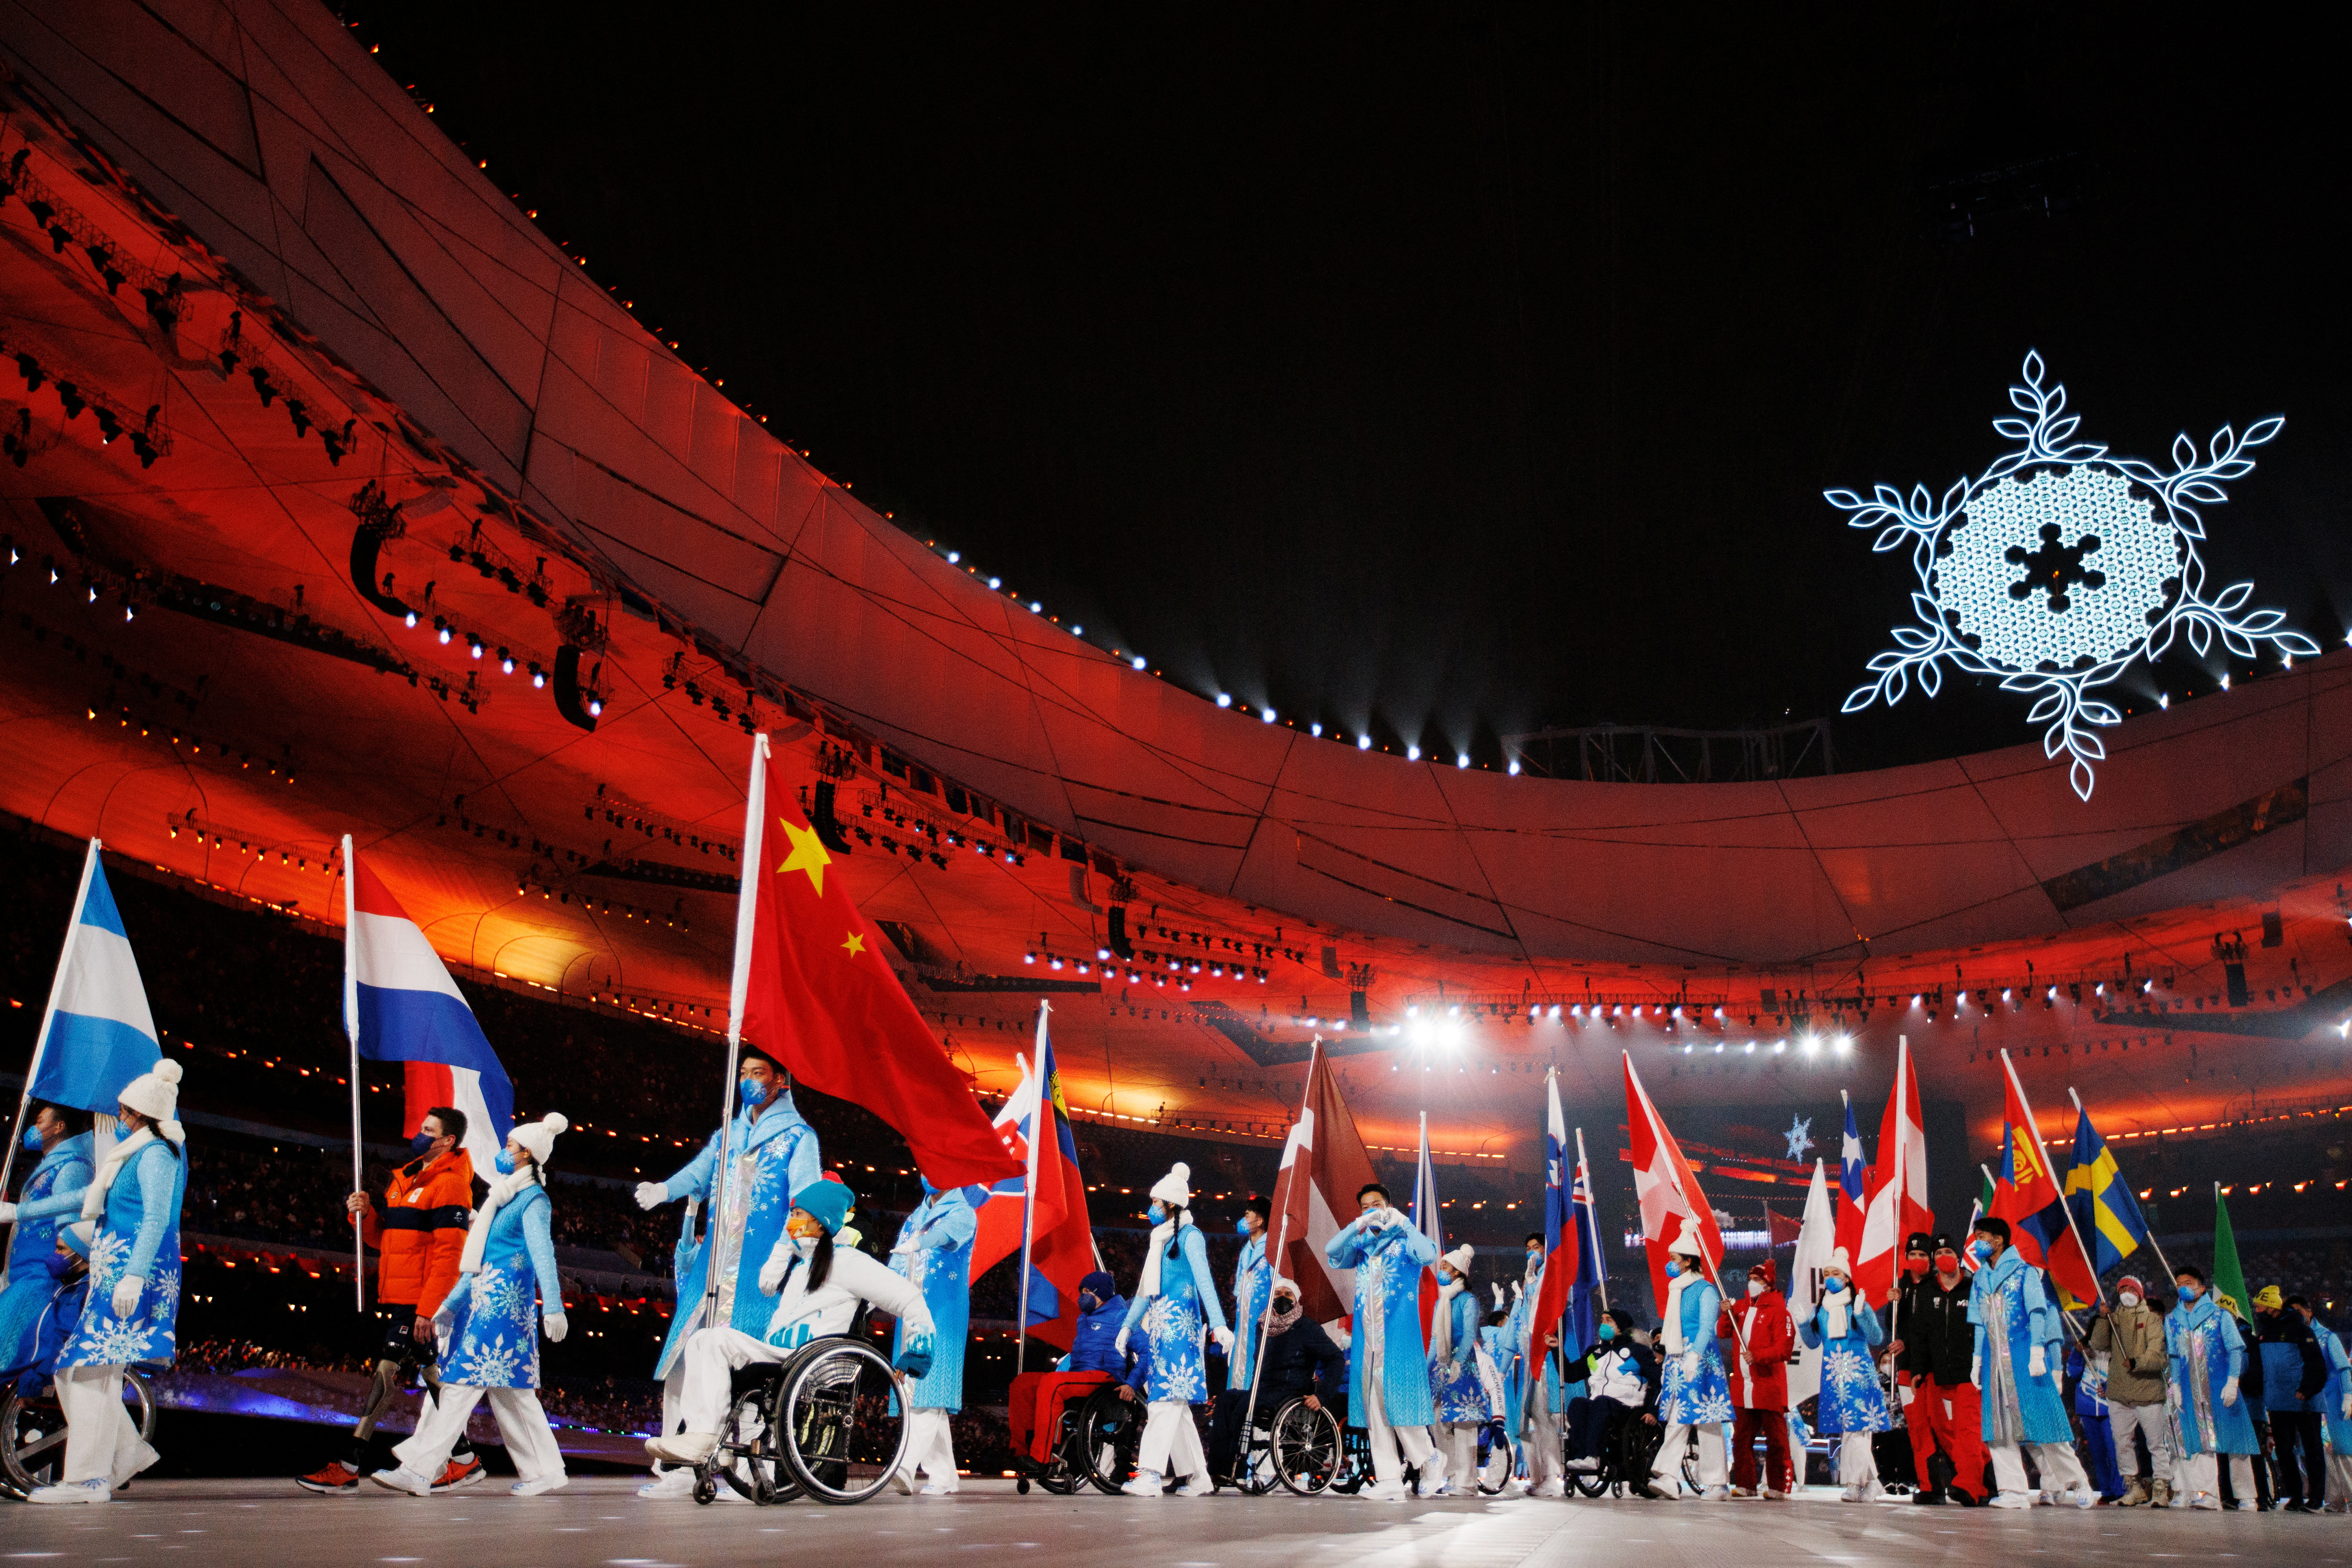 Beijing 2022 Paralympics were a bigger challenge than expected, but athletes still held center stage says IPC President